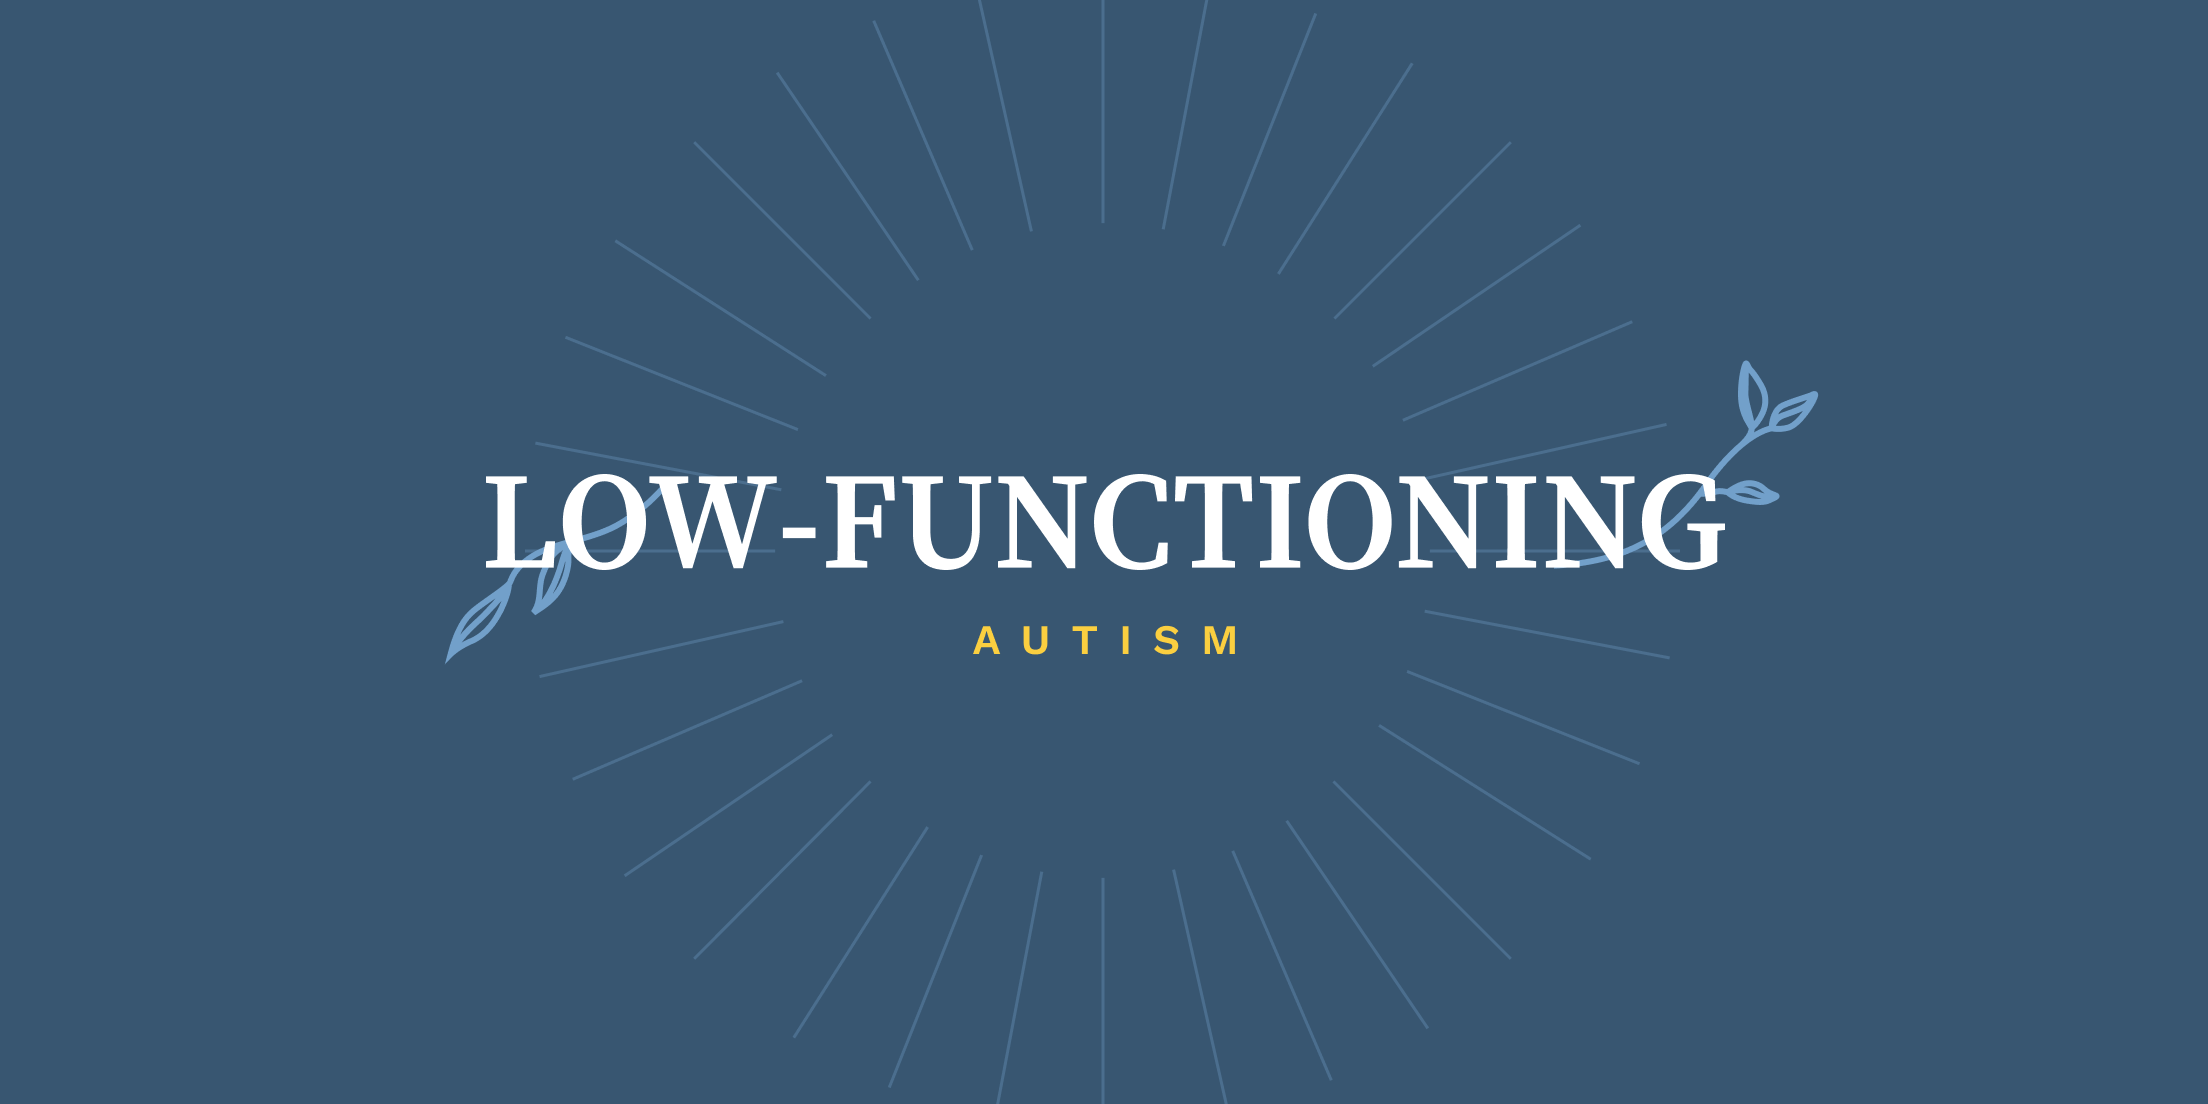 Low-Functioning Autism: The Symptoms & What It Means